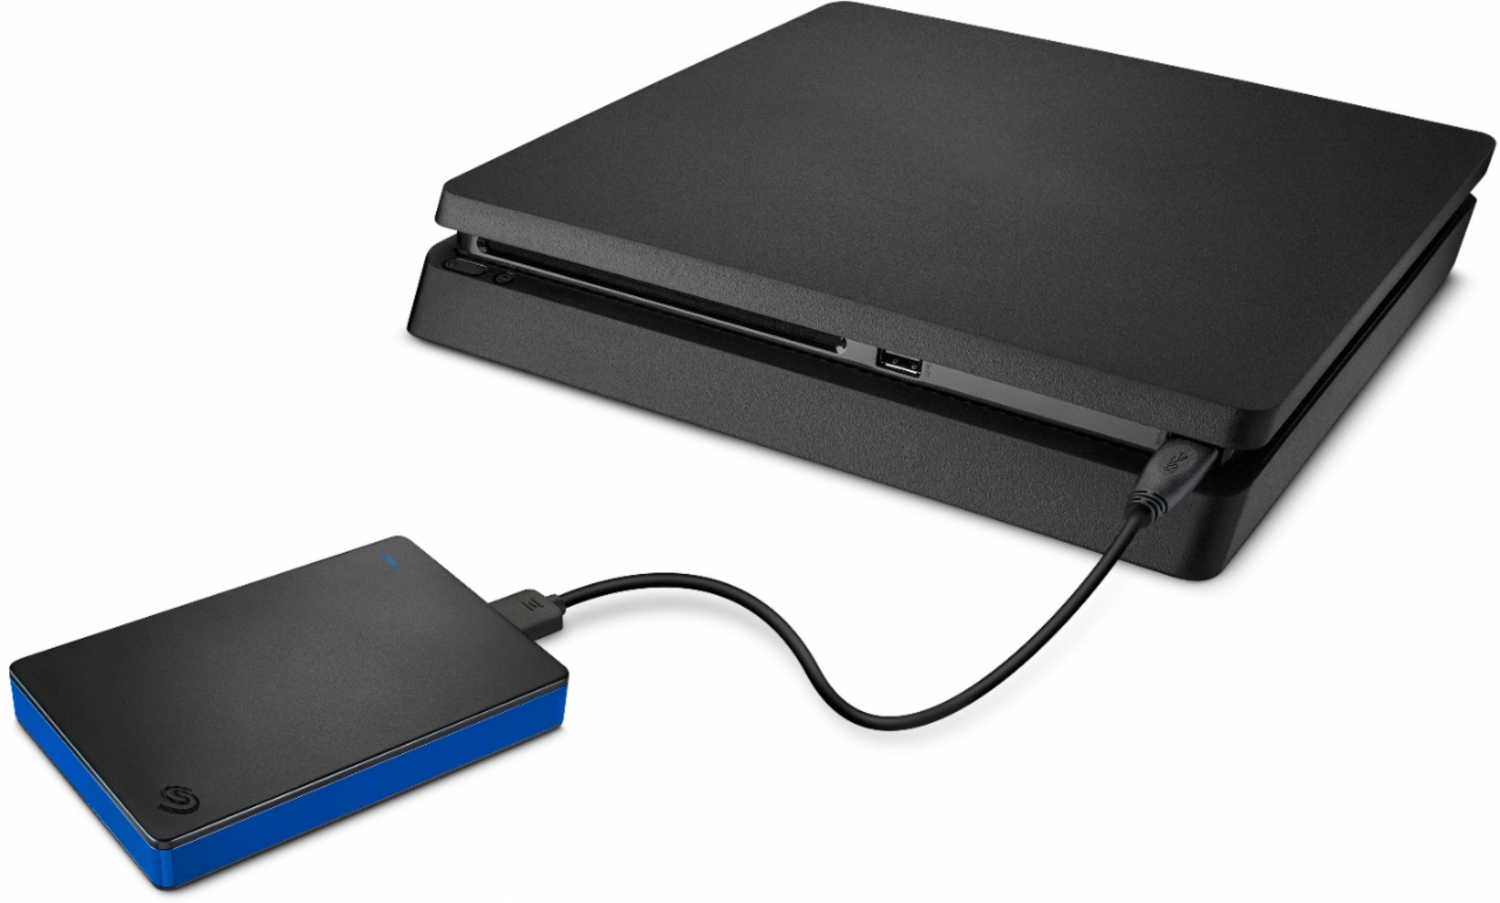 external hard drive for ps4 and ps5